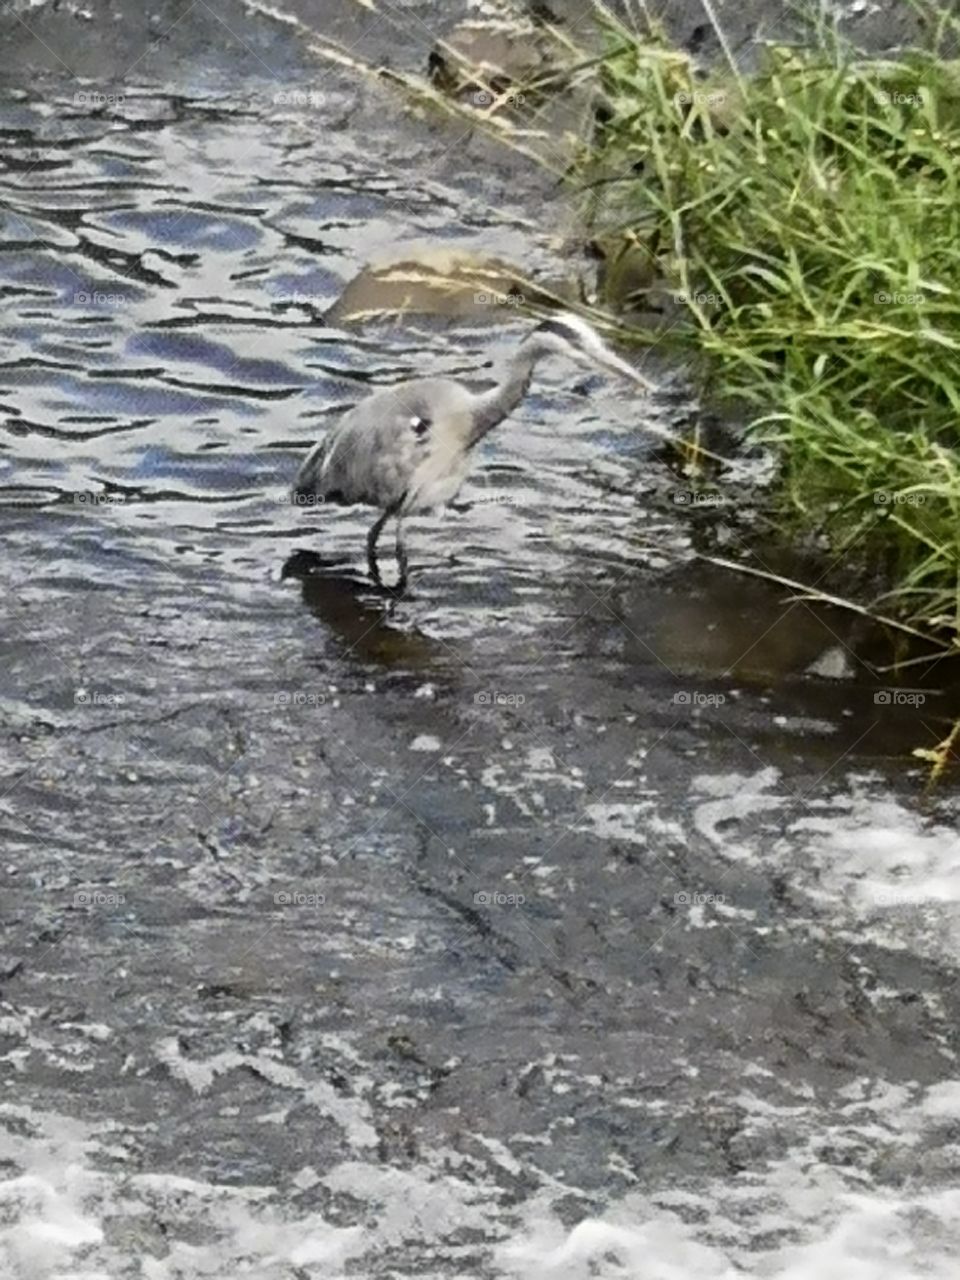 The magestic heron